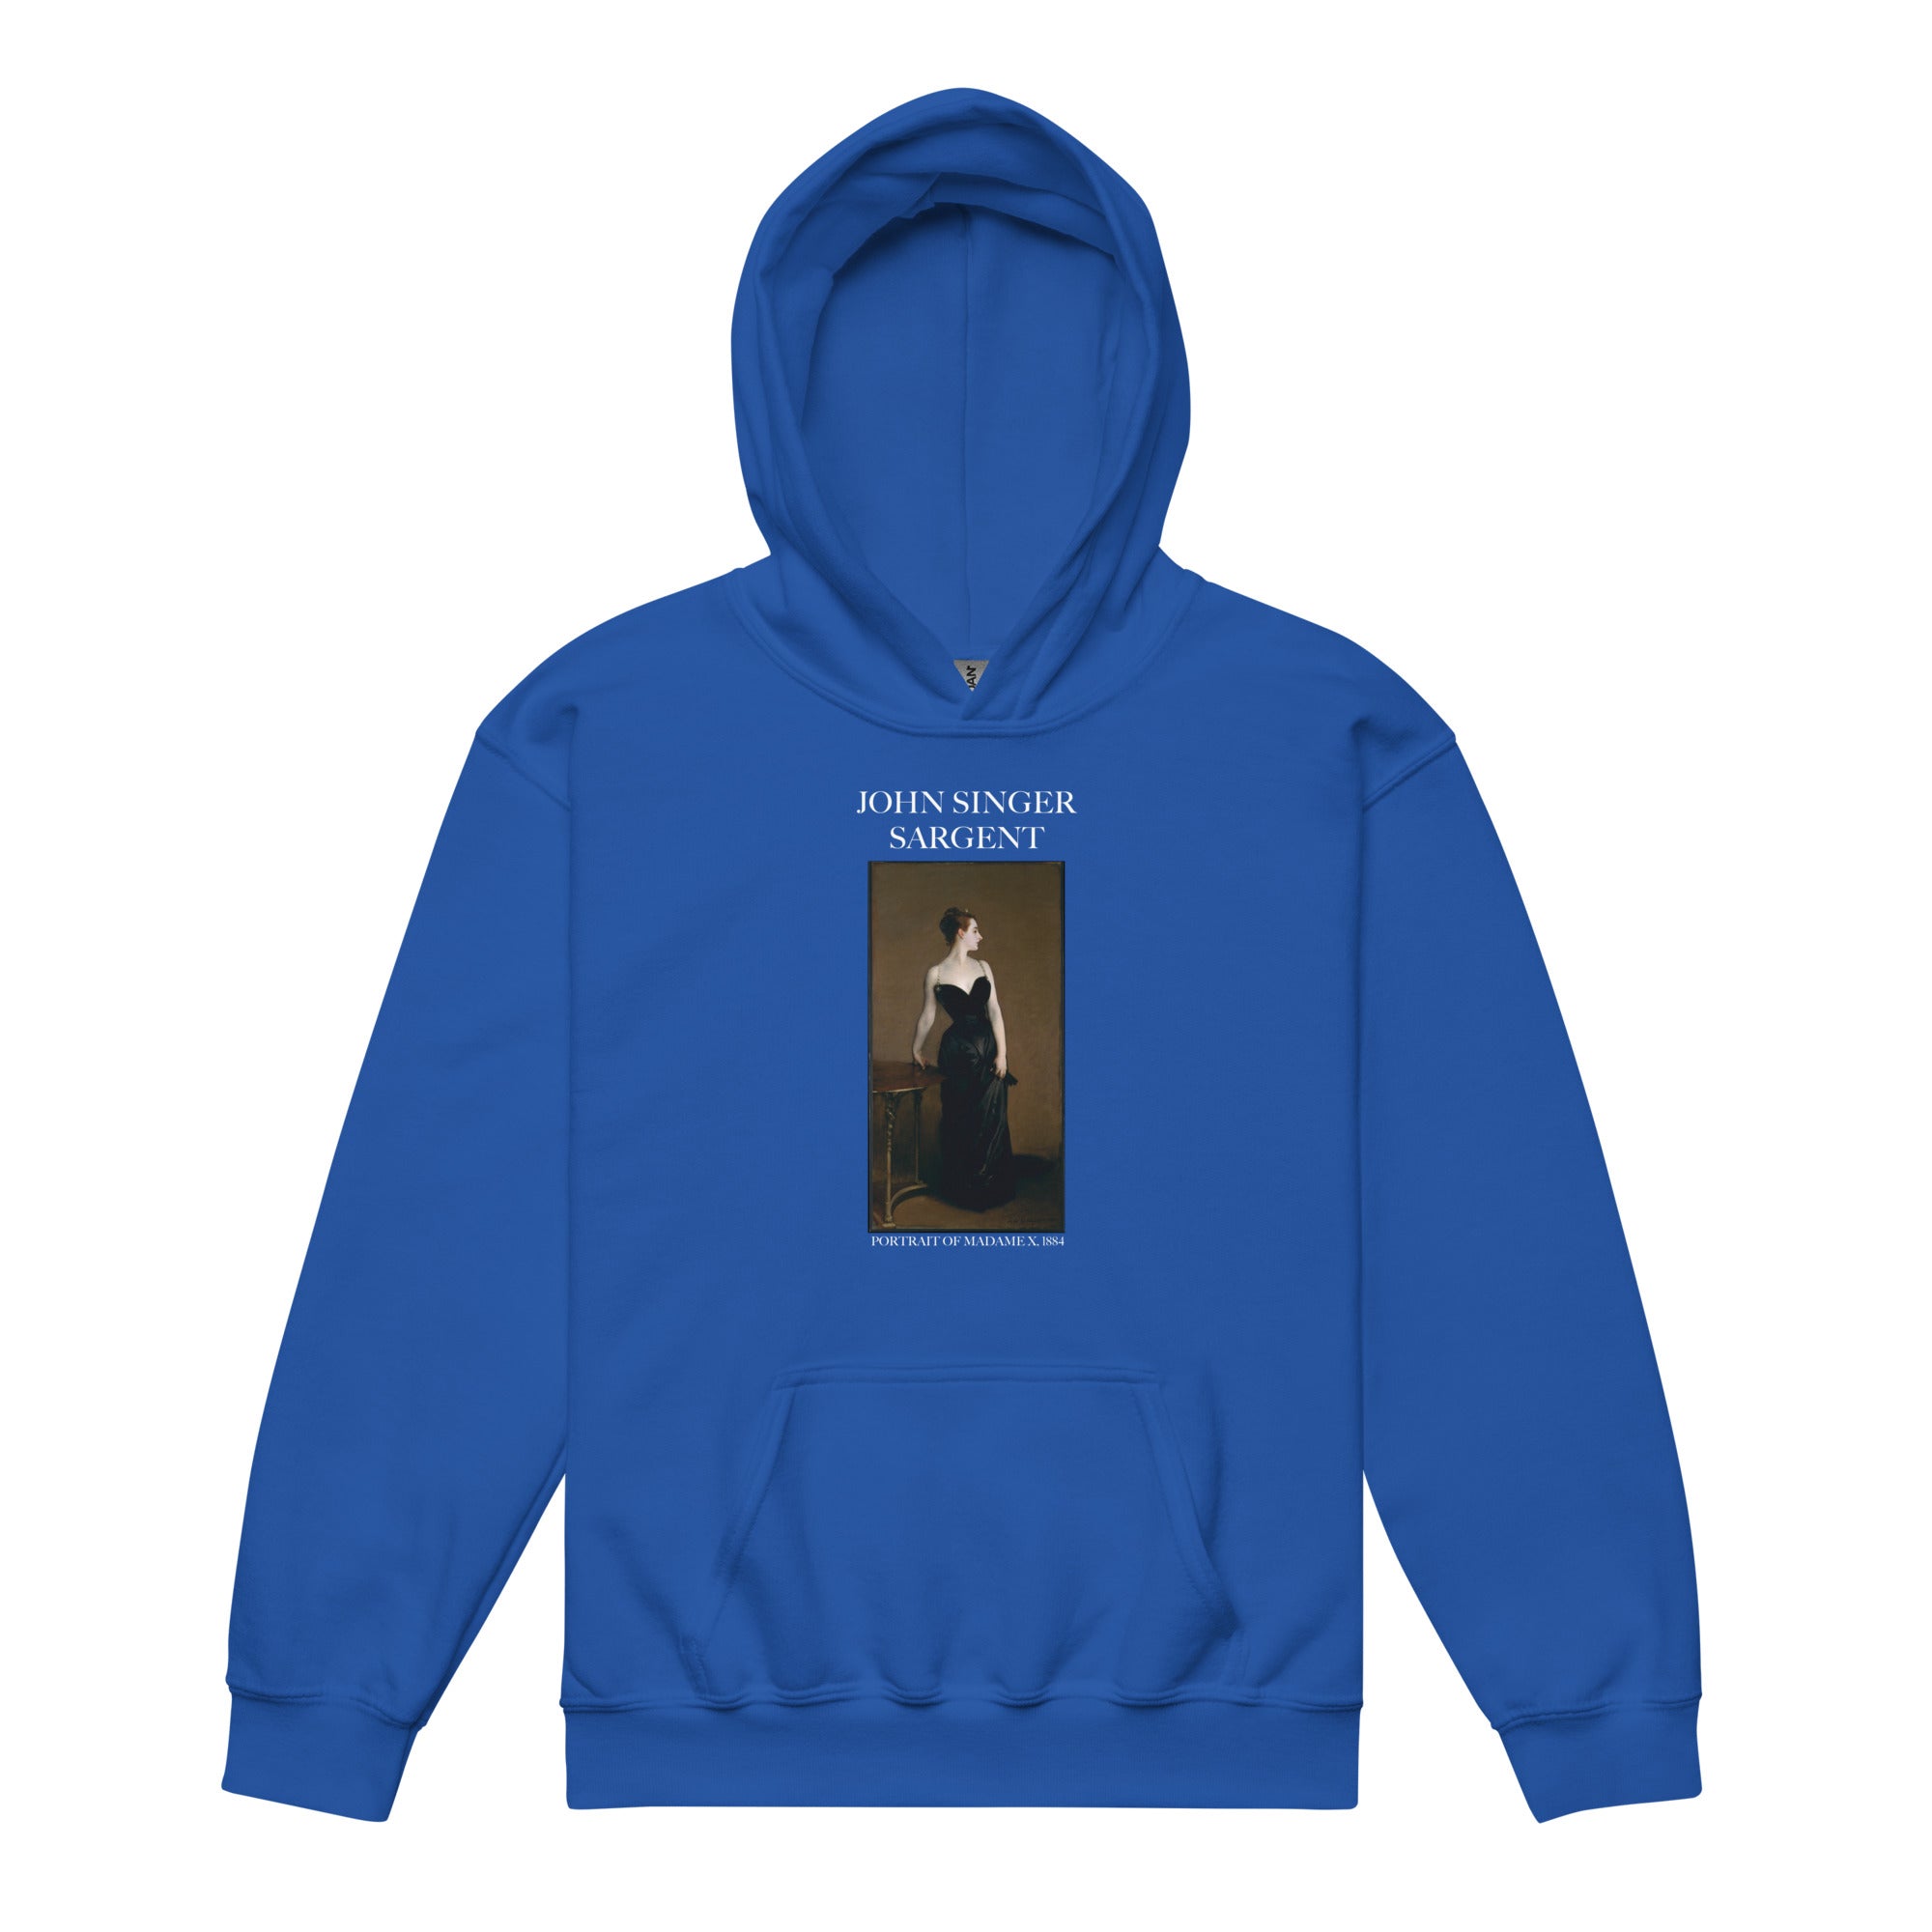 John Singer Sargent 'Portrait of Madame X' Famous Painting Hoodie | Premium Youth Art Hoodie